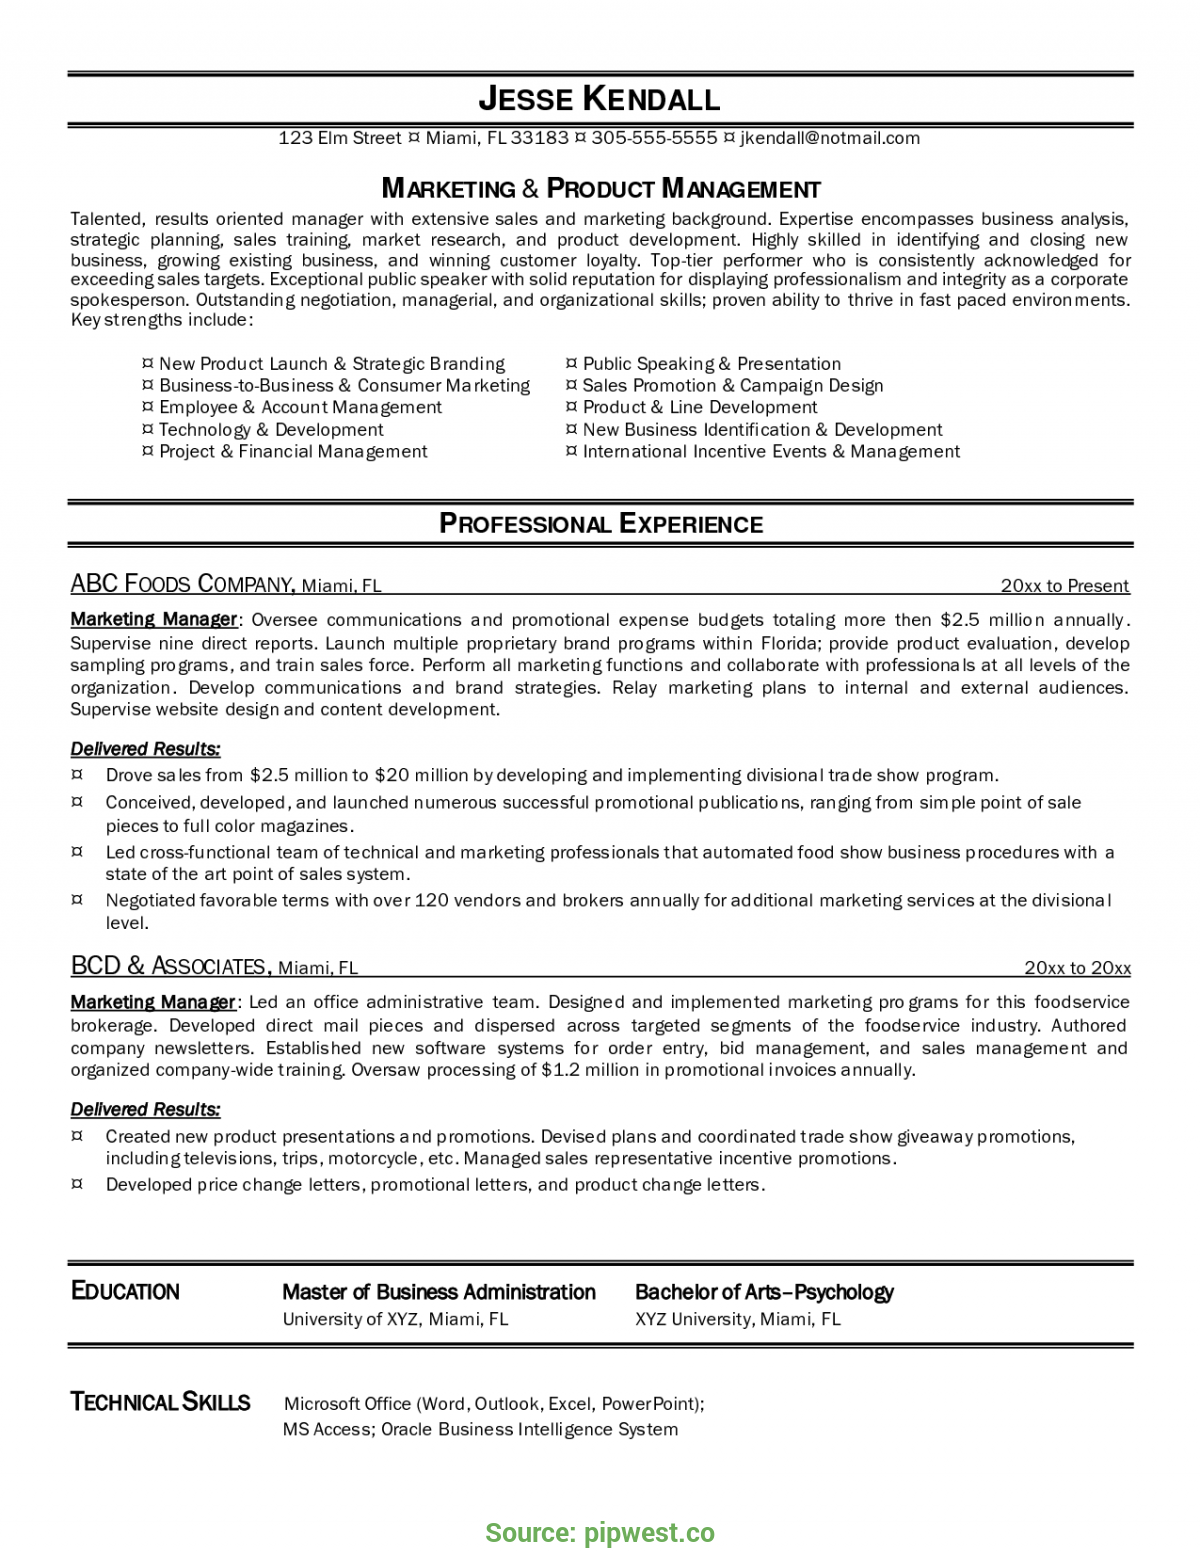 resume templates office open office database templates small